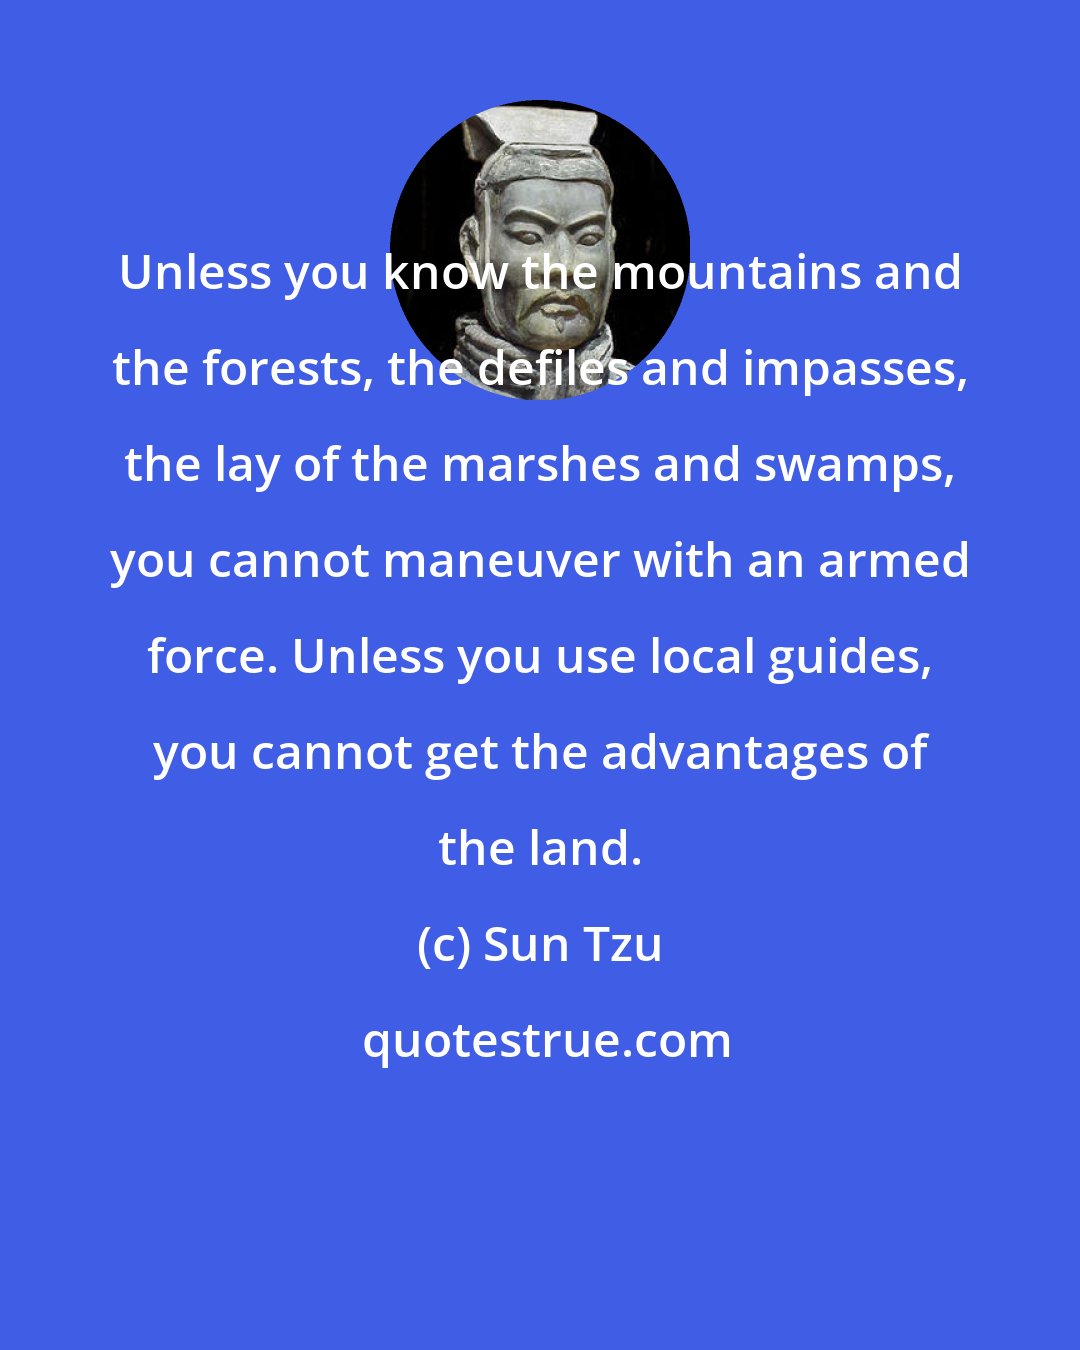 Sun Tzu: Unless you know the mountains and the forests, the defiles and impasses, the lay of the marshes and swamps, you cannot maneuver with an armed force. Unless you use local guides, you cannot get the advantages of the land.